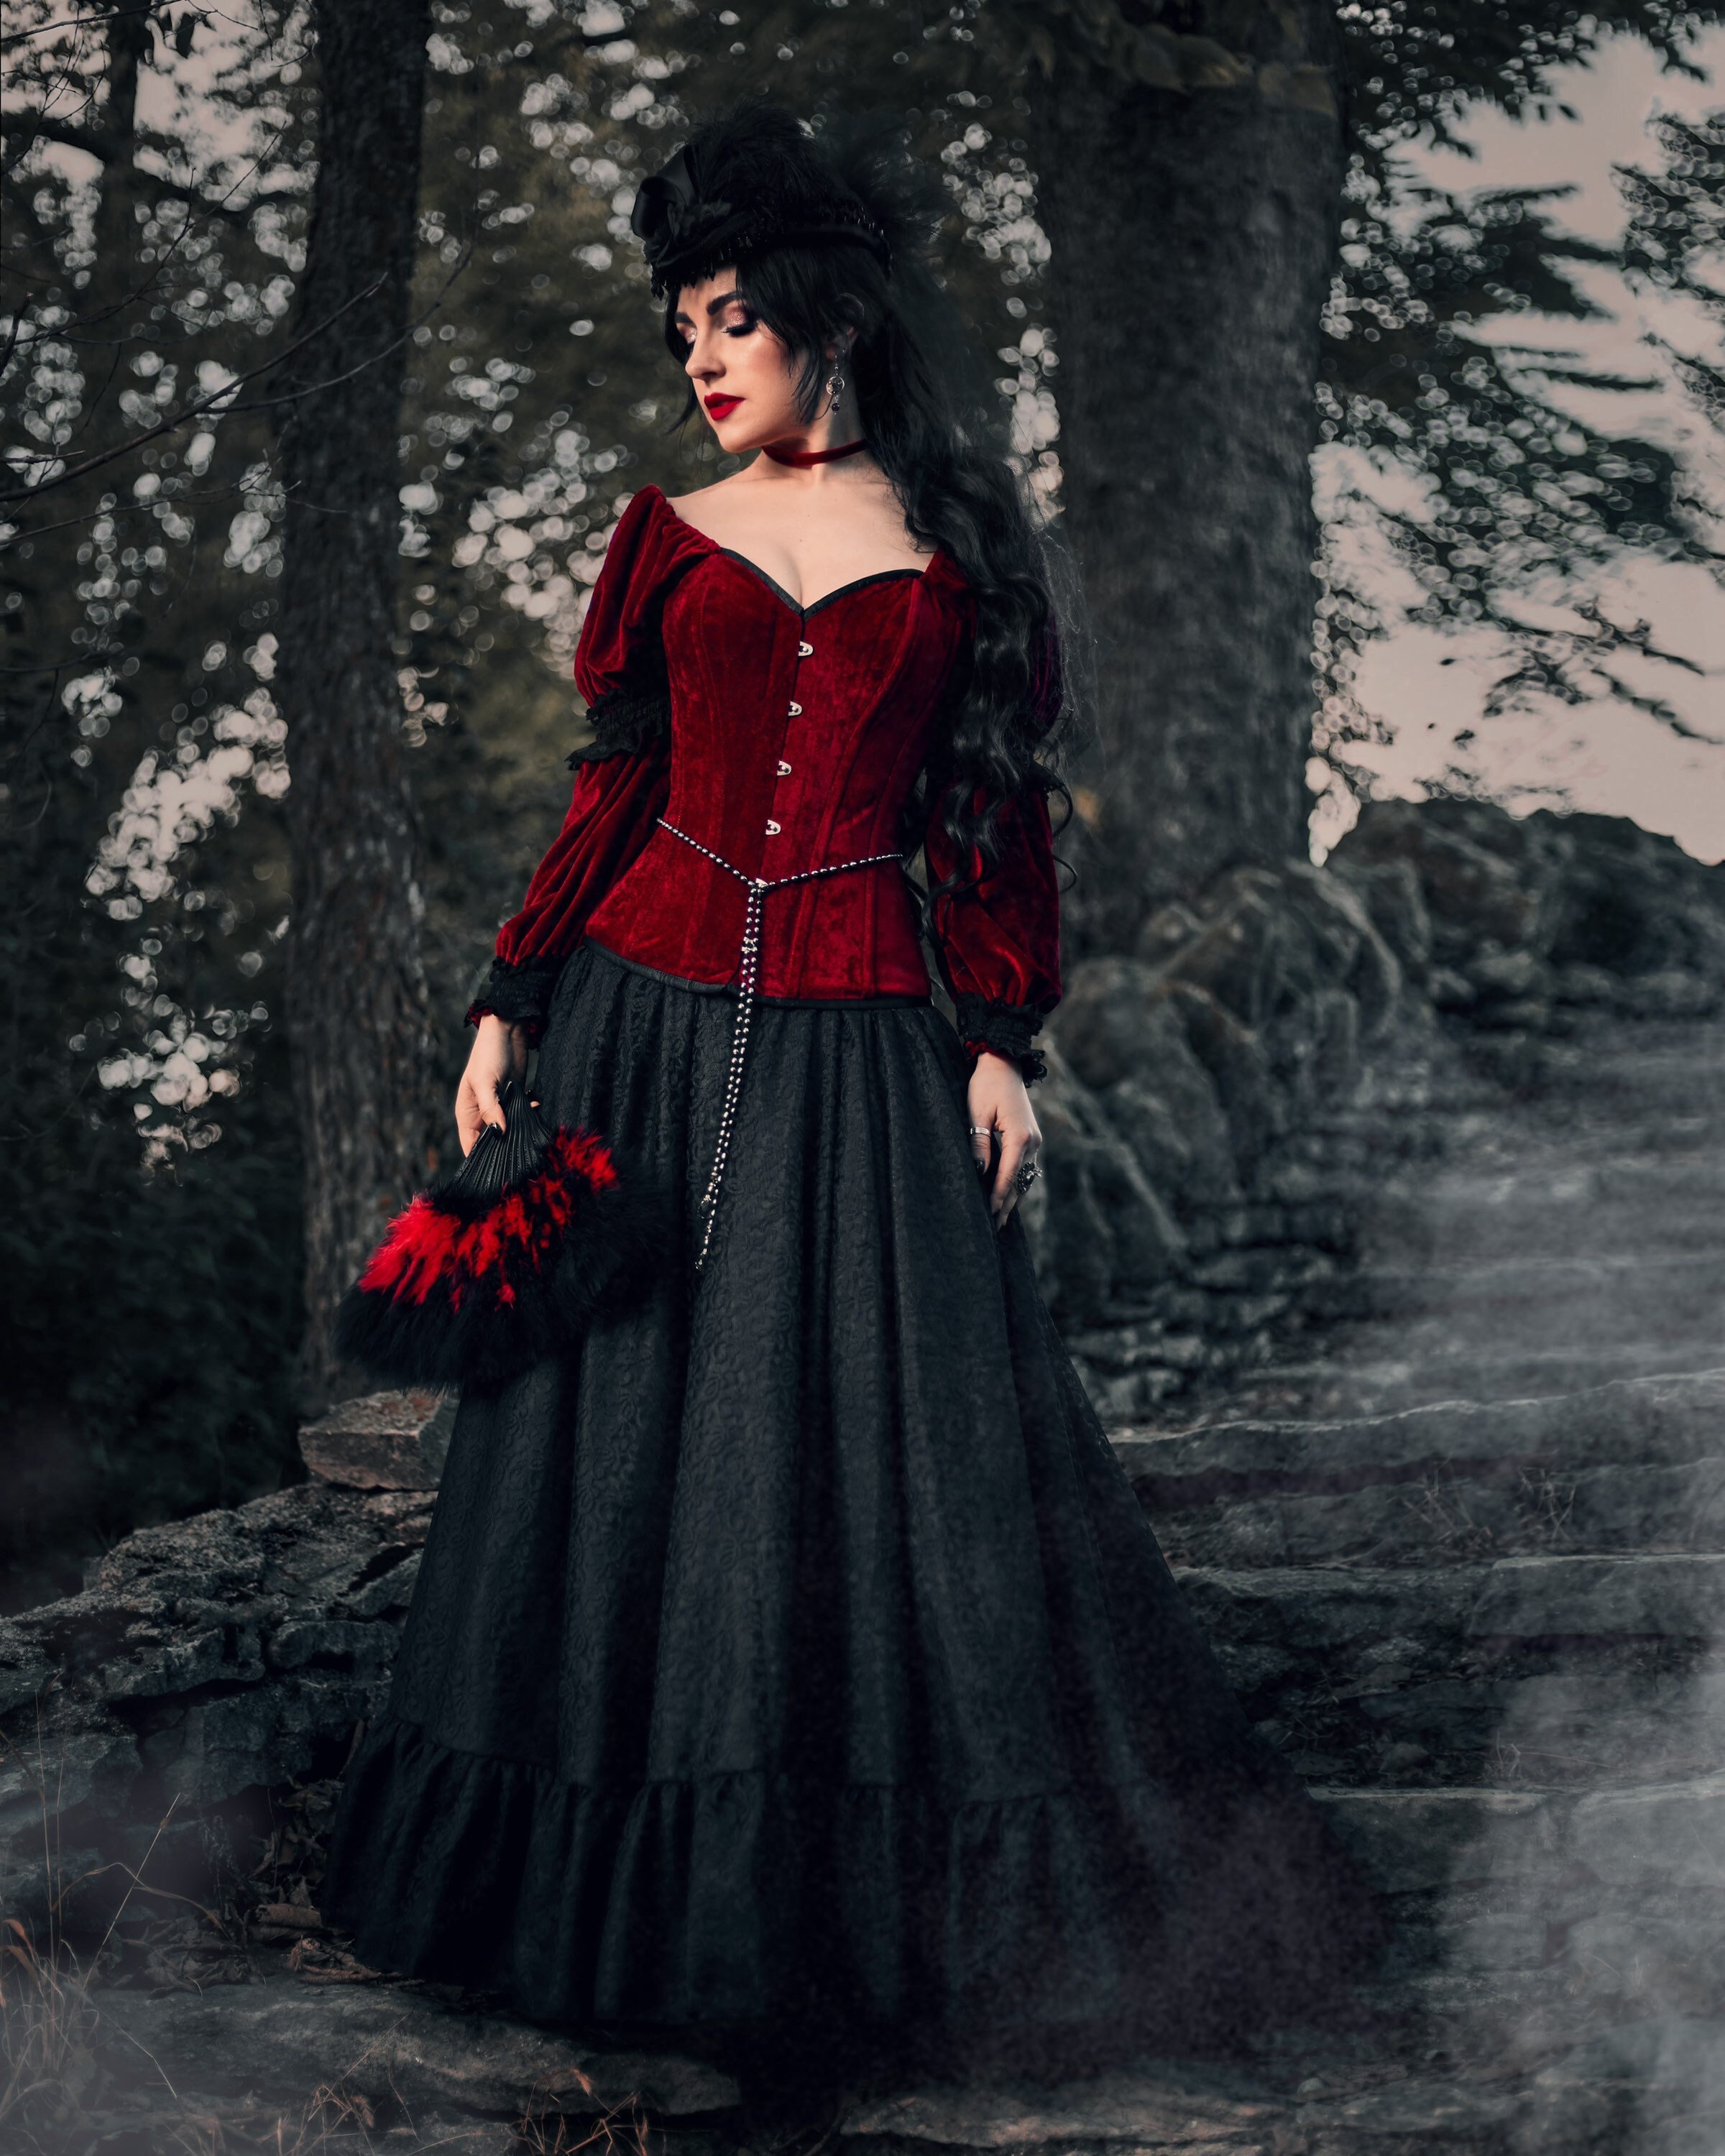 The Masquerade Gothic Victorian Velvet and Lace Vampire Gown Dress Corset  Costume Limited Edition -  Sweden